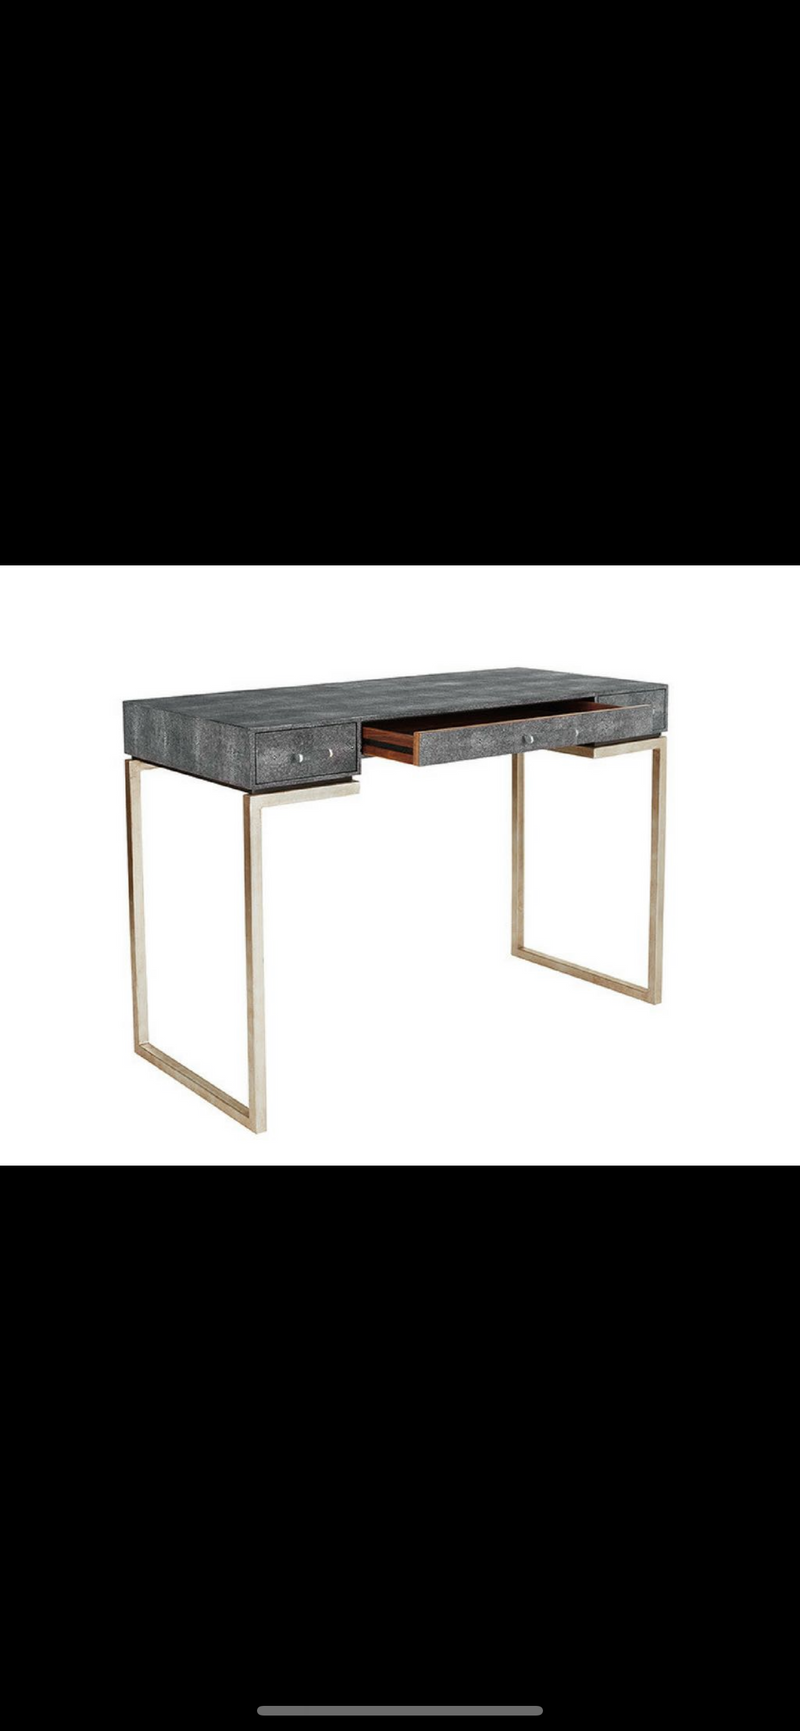 Faux Shagreen Console Table - Charcoal